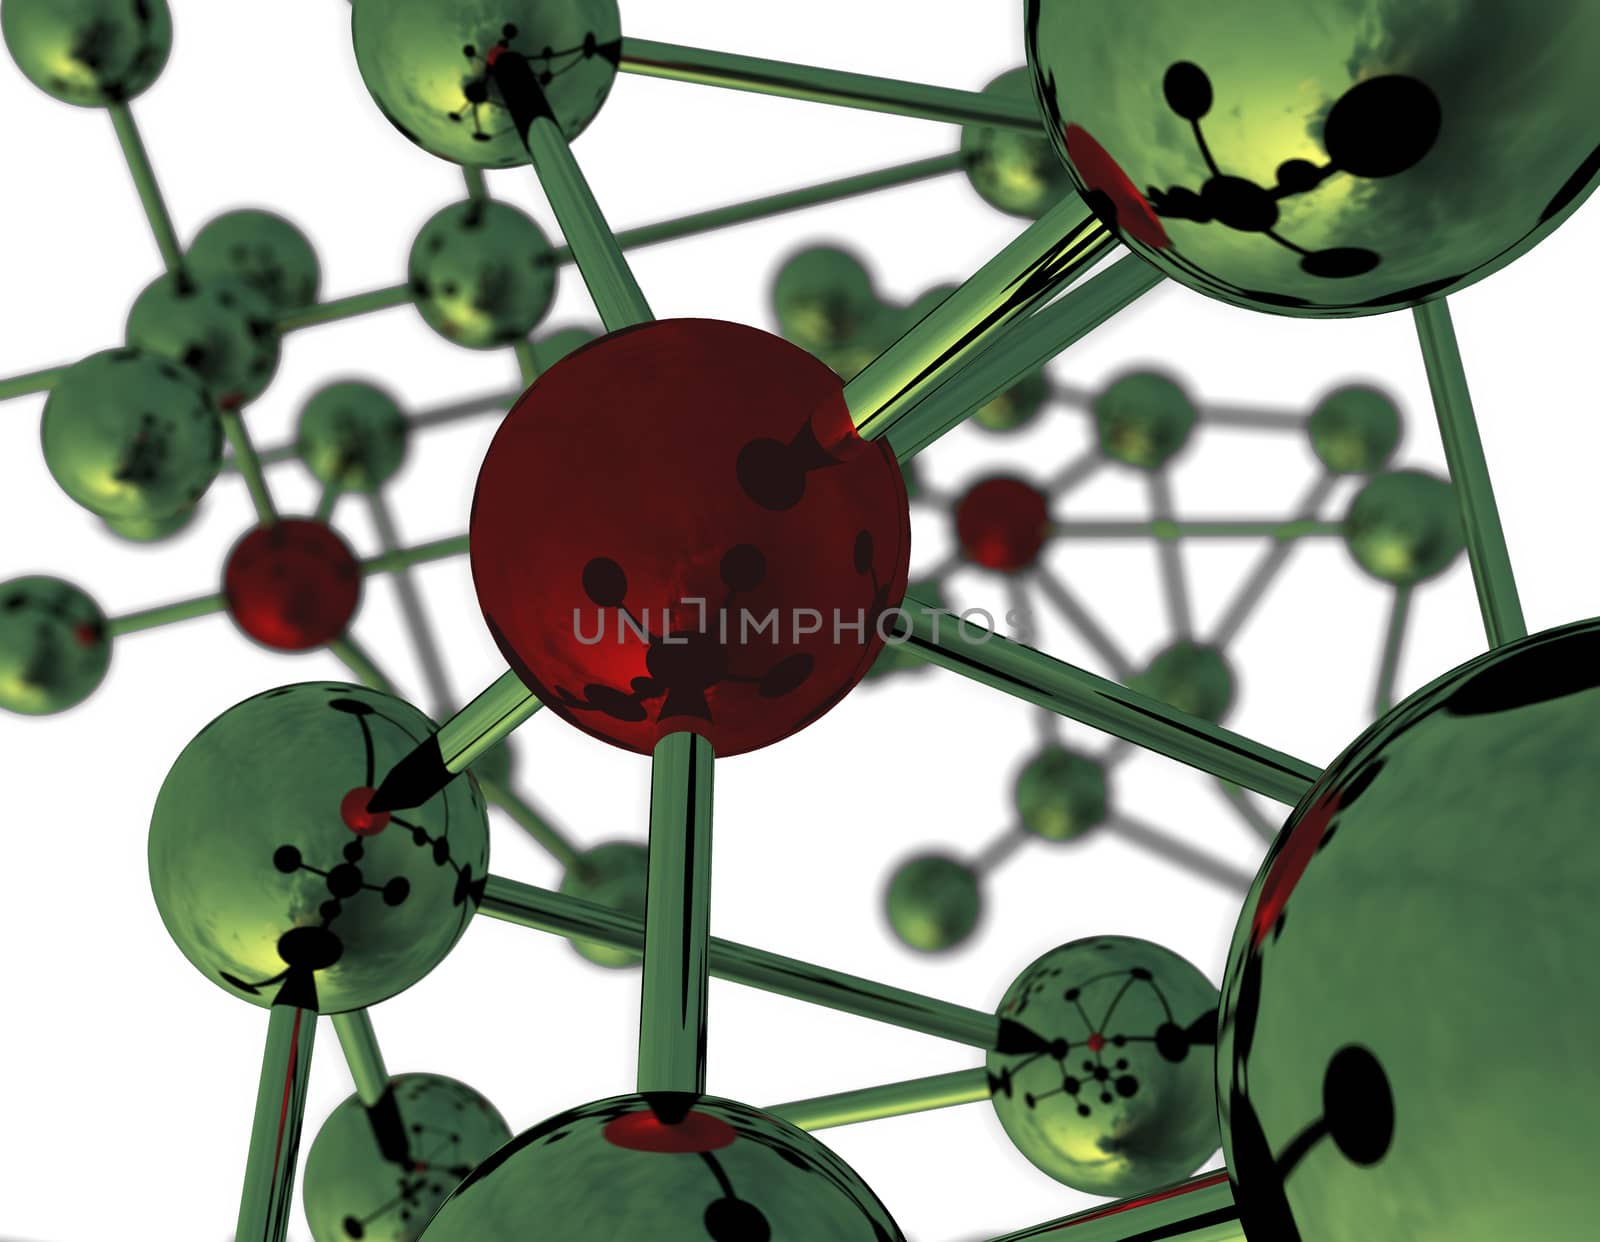 Abstract view of molecules. 3D rendering with raytraced textures.